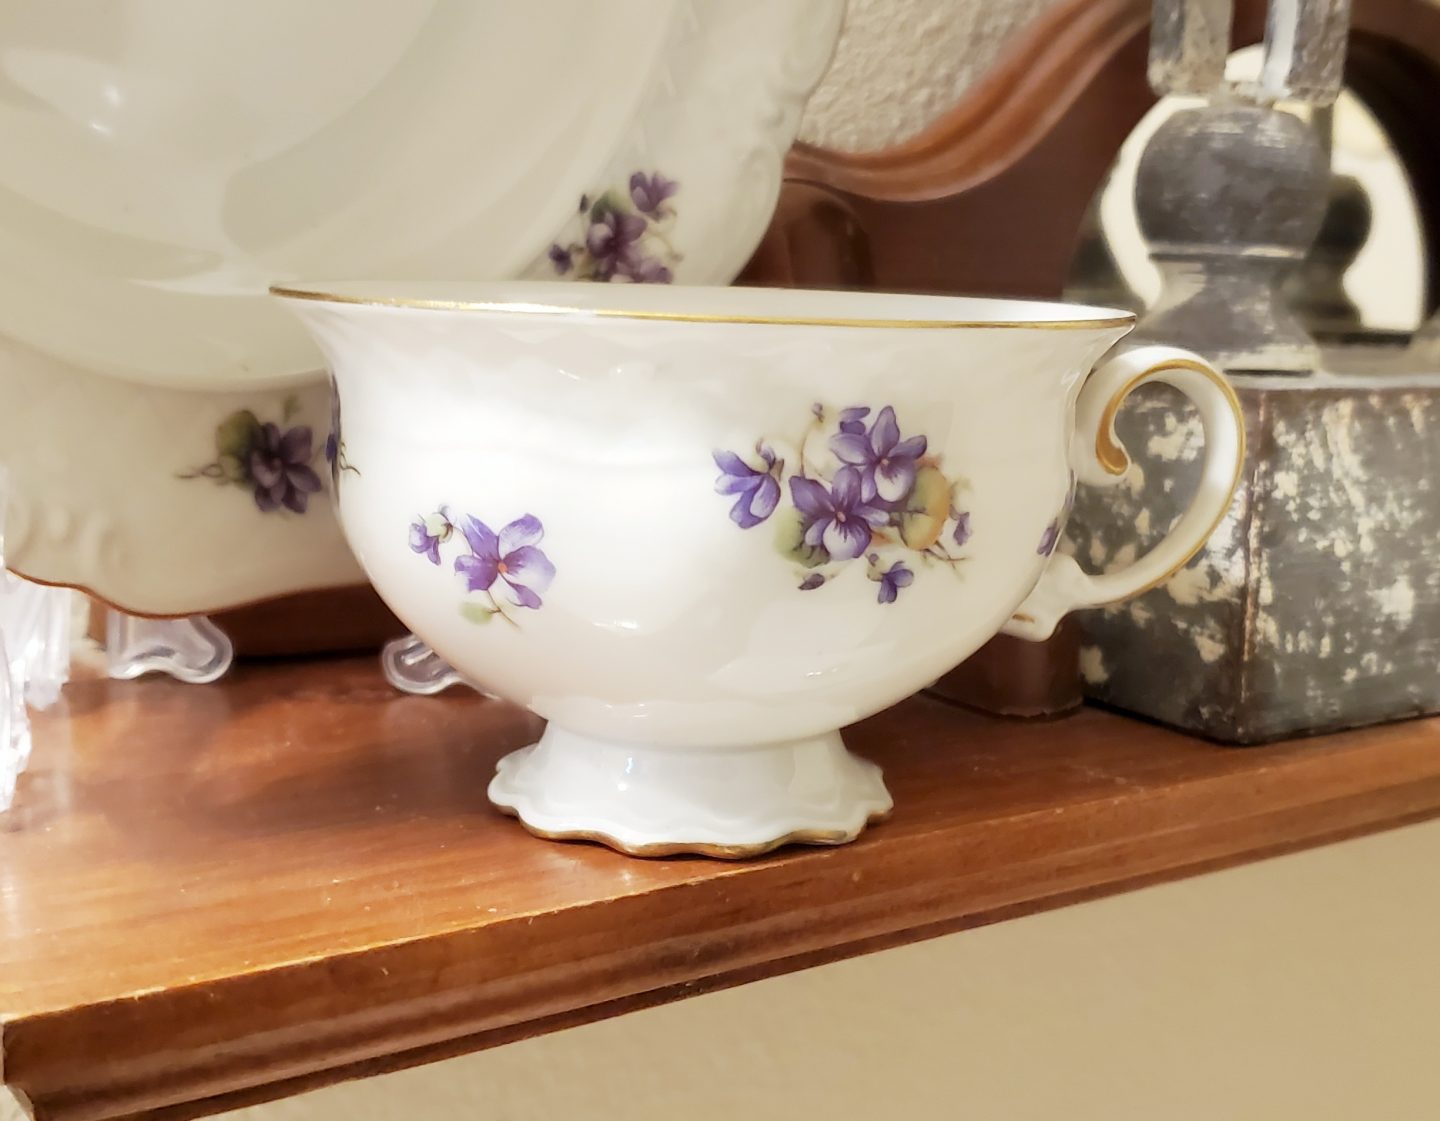 Up close photo of a purple floral teacup found at Goodwill.